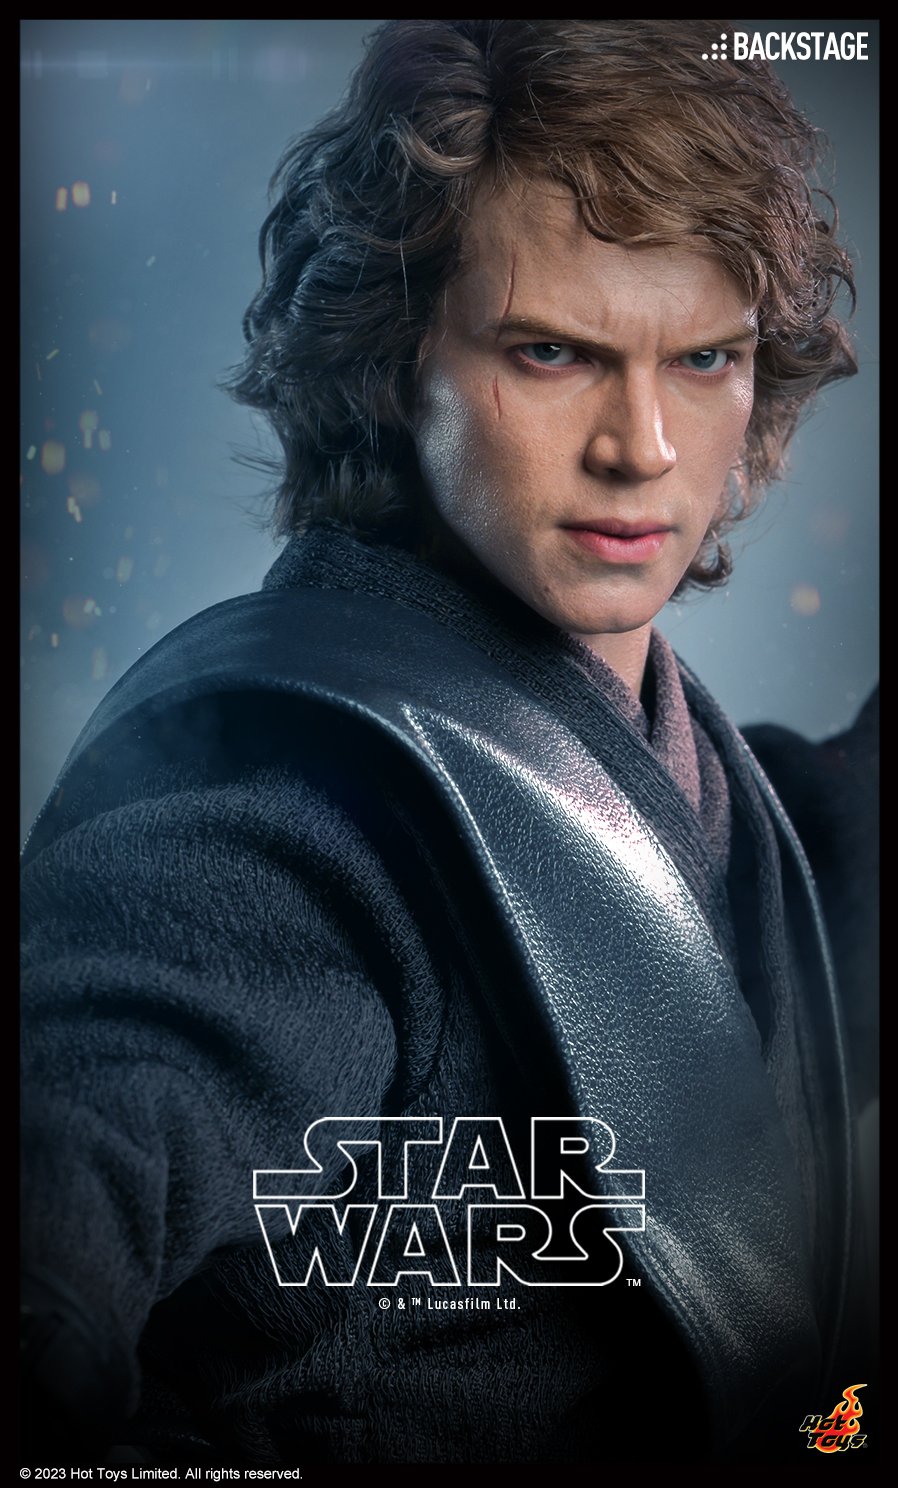 RevengeoftheSith - NEW PRODUCT: HOT TOYS: STAR WARS EPISODE III: REVENGE OF THE SITH™ ANAKIN SKYWALKER™ 1/6TH SCALE COLLECTIBLE FIGURE - Page 7 Hot-Toys-ROTS-Anakin-Preview-2